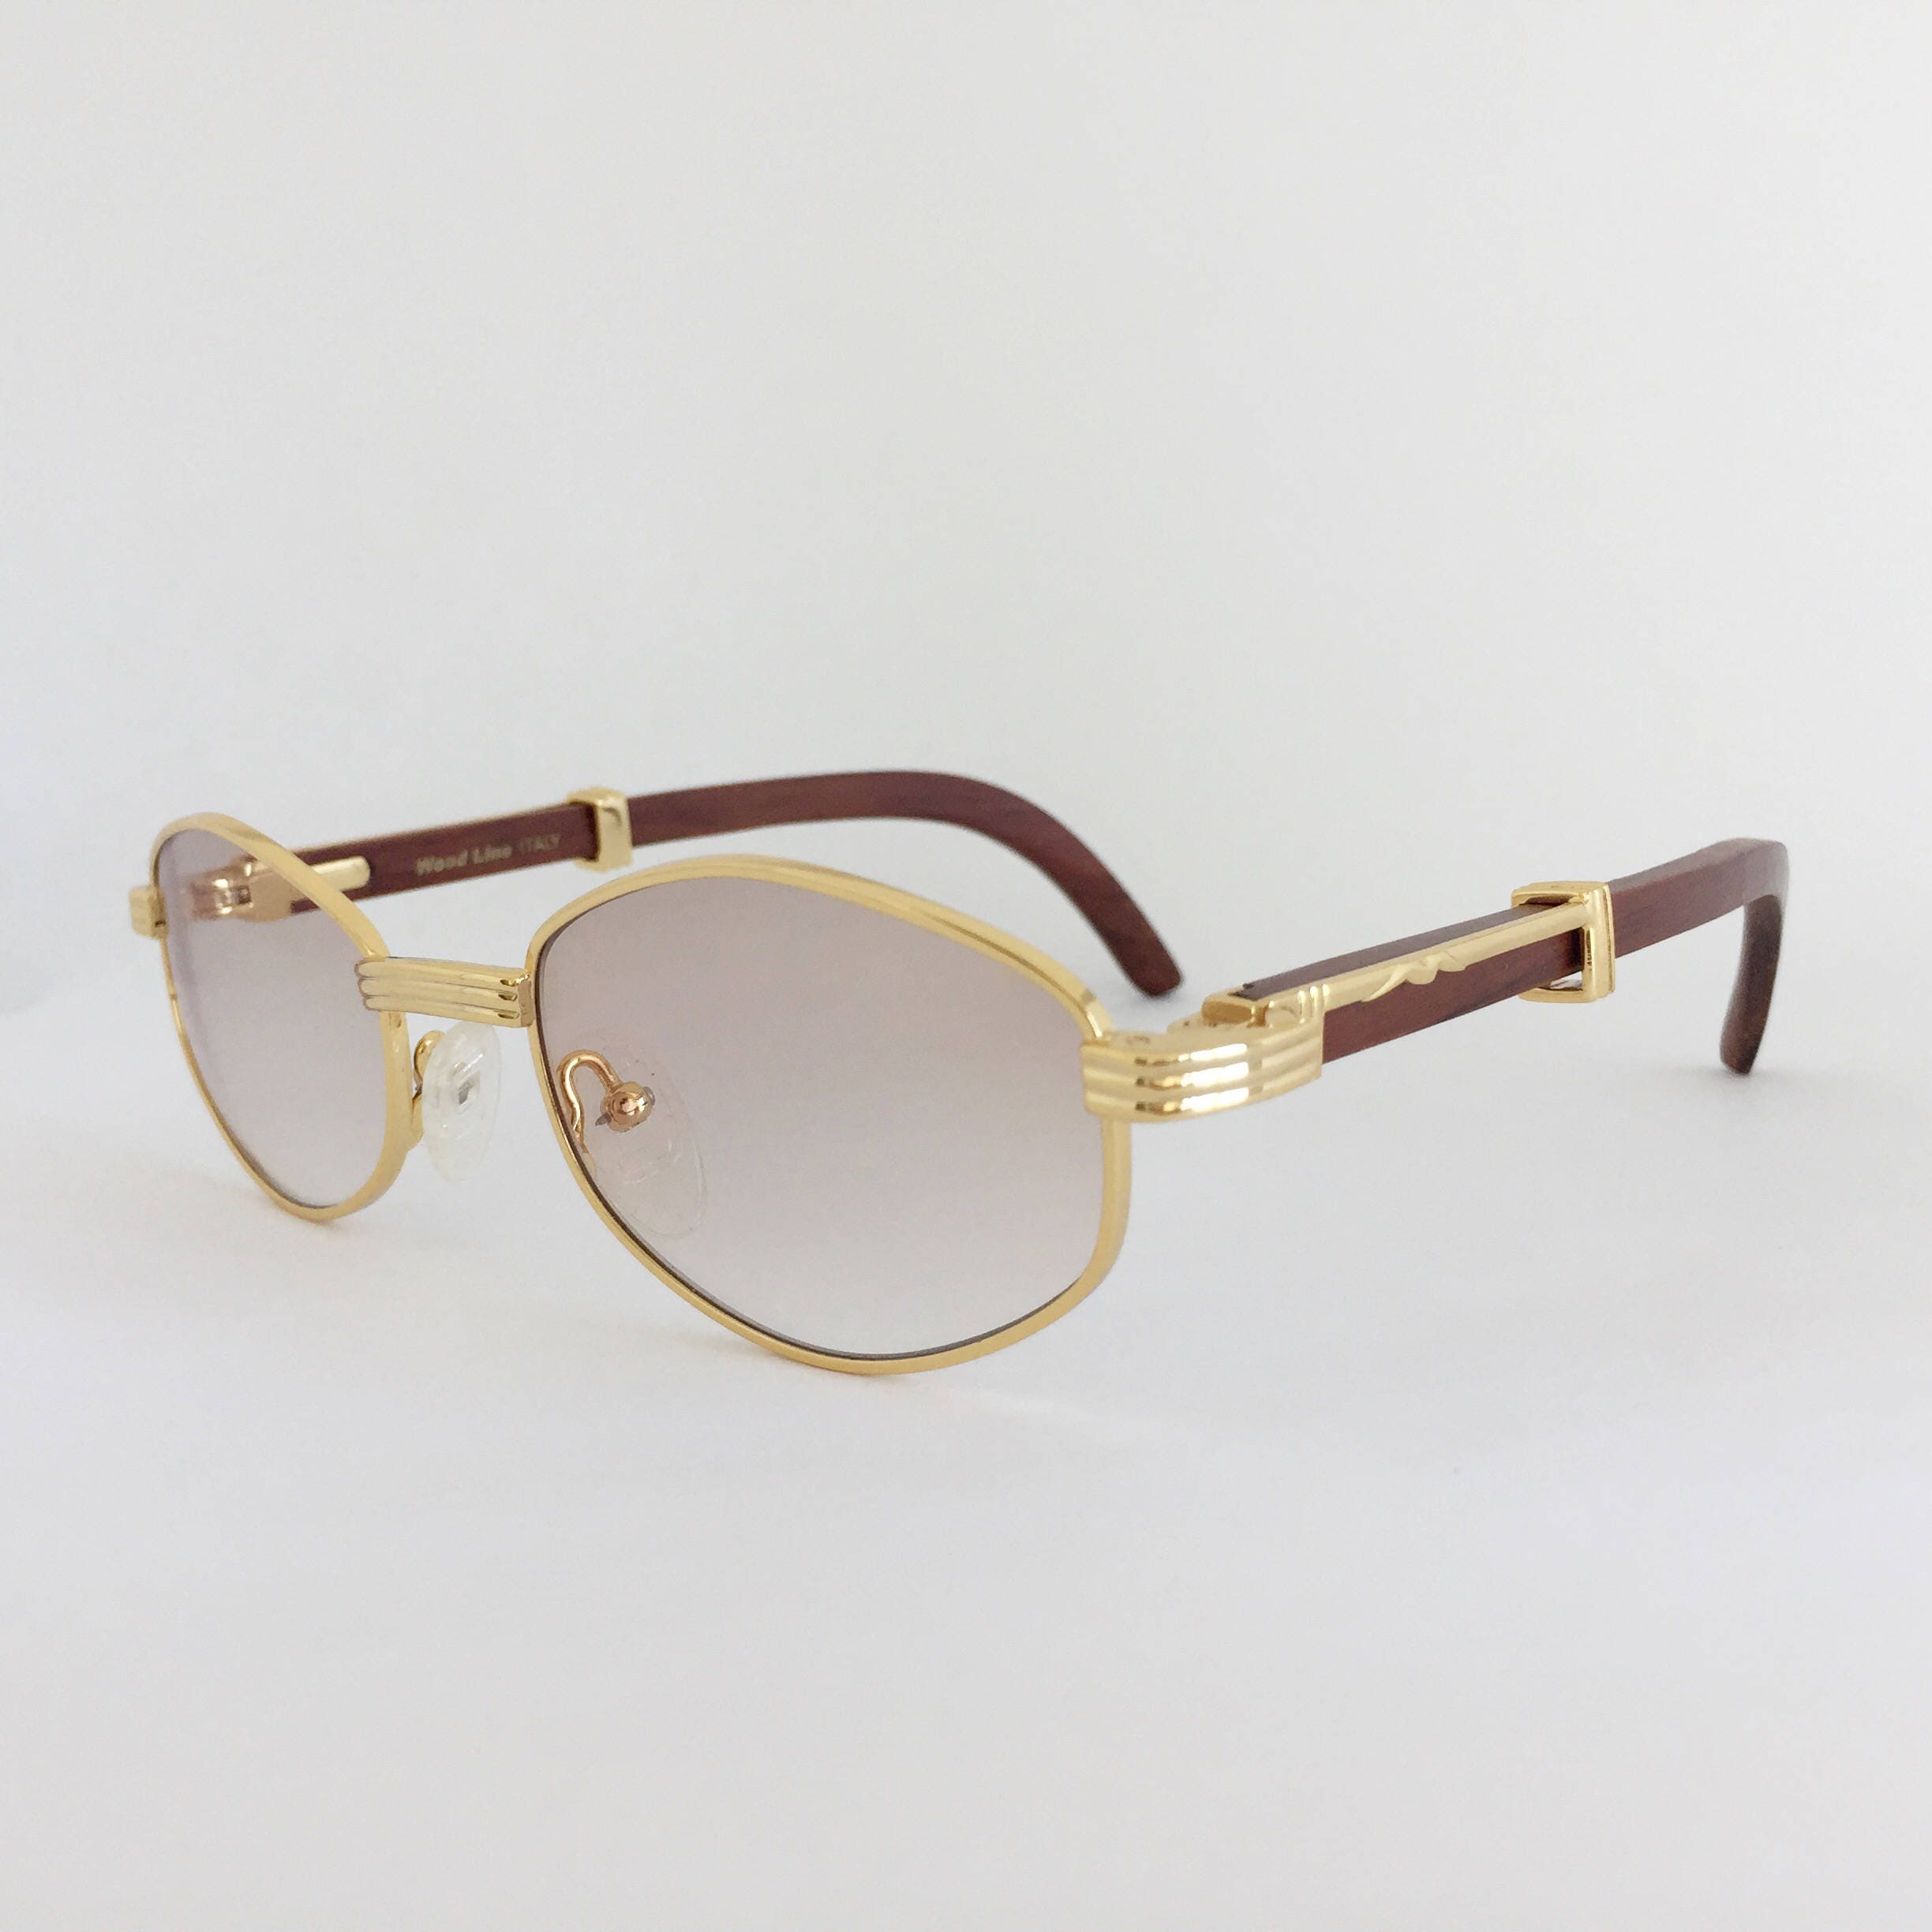 Cartier Style Wood Sunglasses Vintage Frames Gold And Wood 